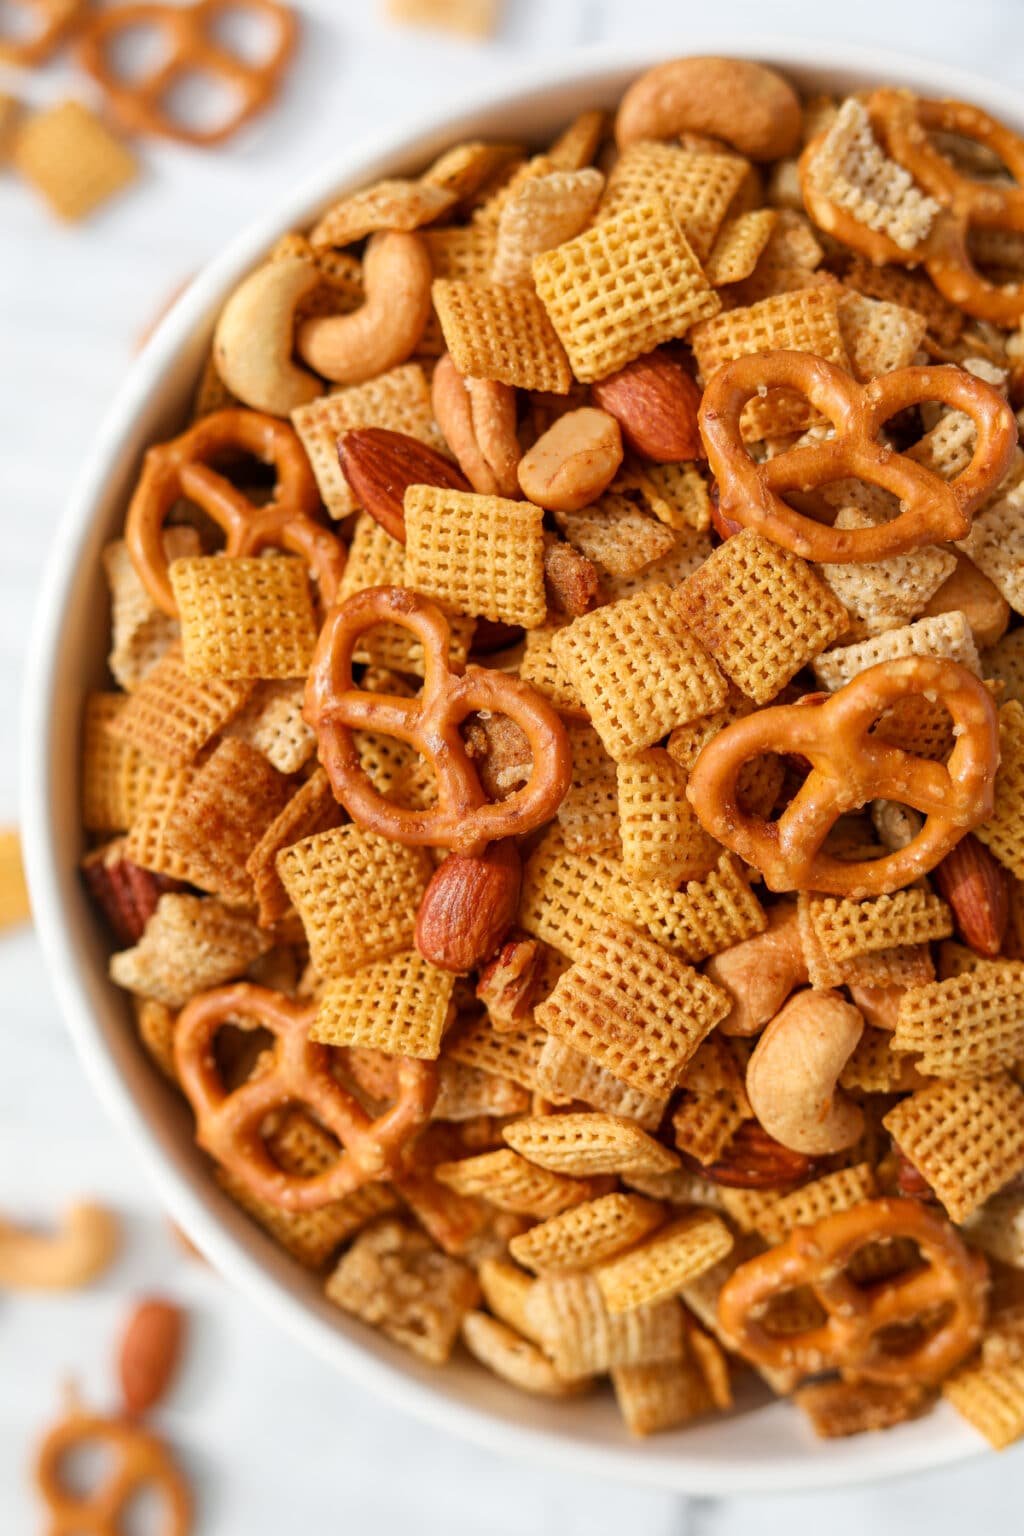 Homemade Gluten Free Chex Mix (Easy Snack Mix Recipe)